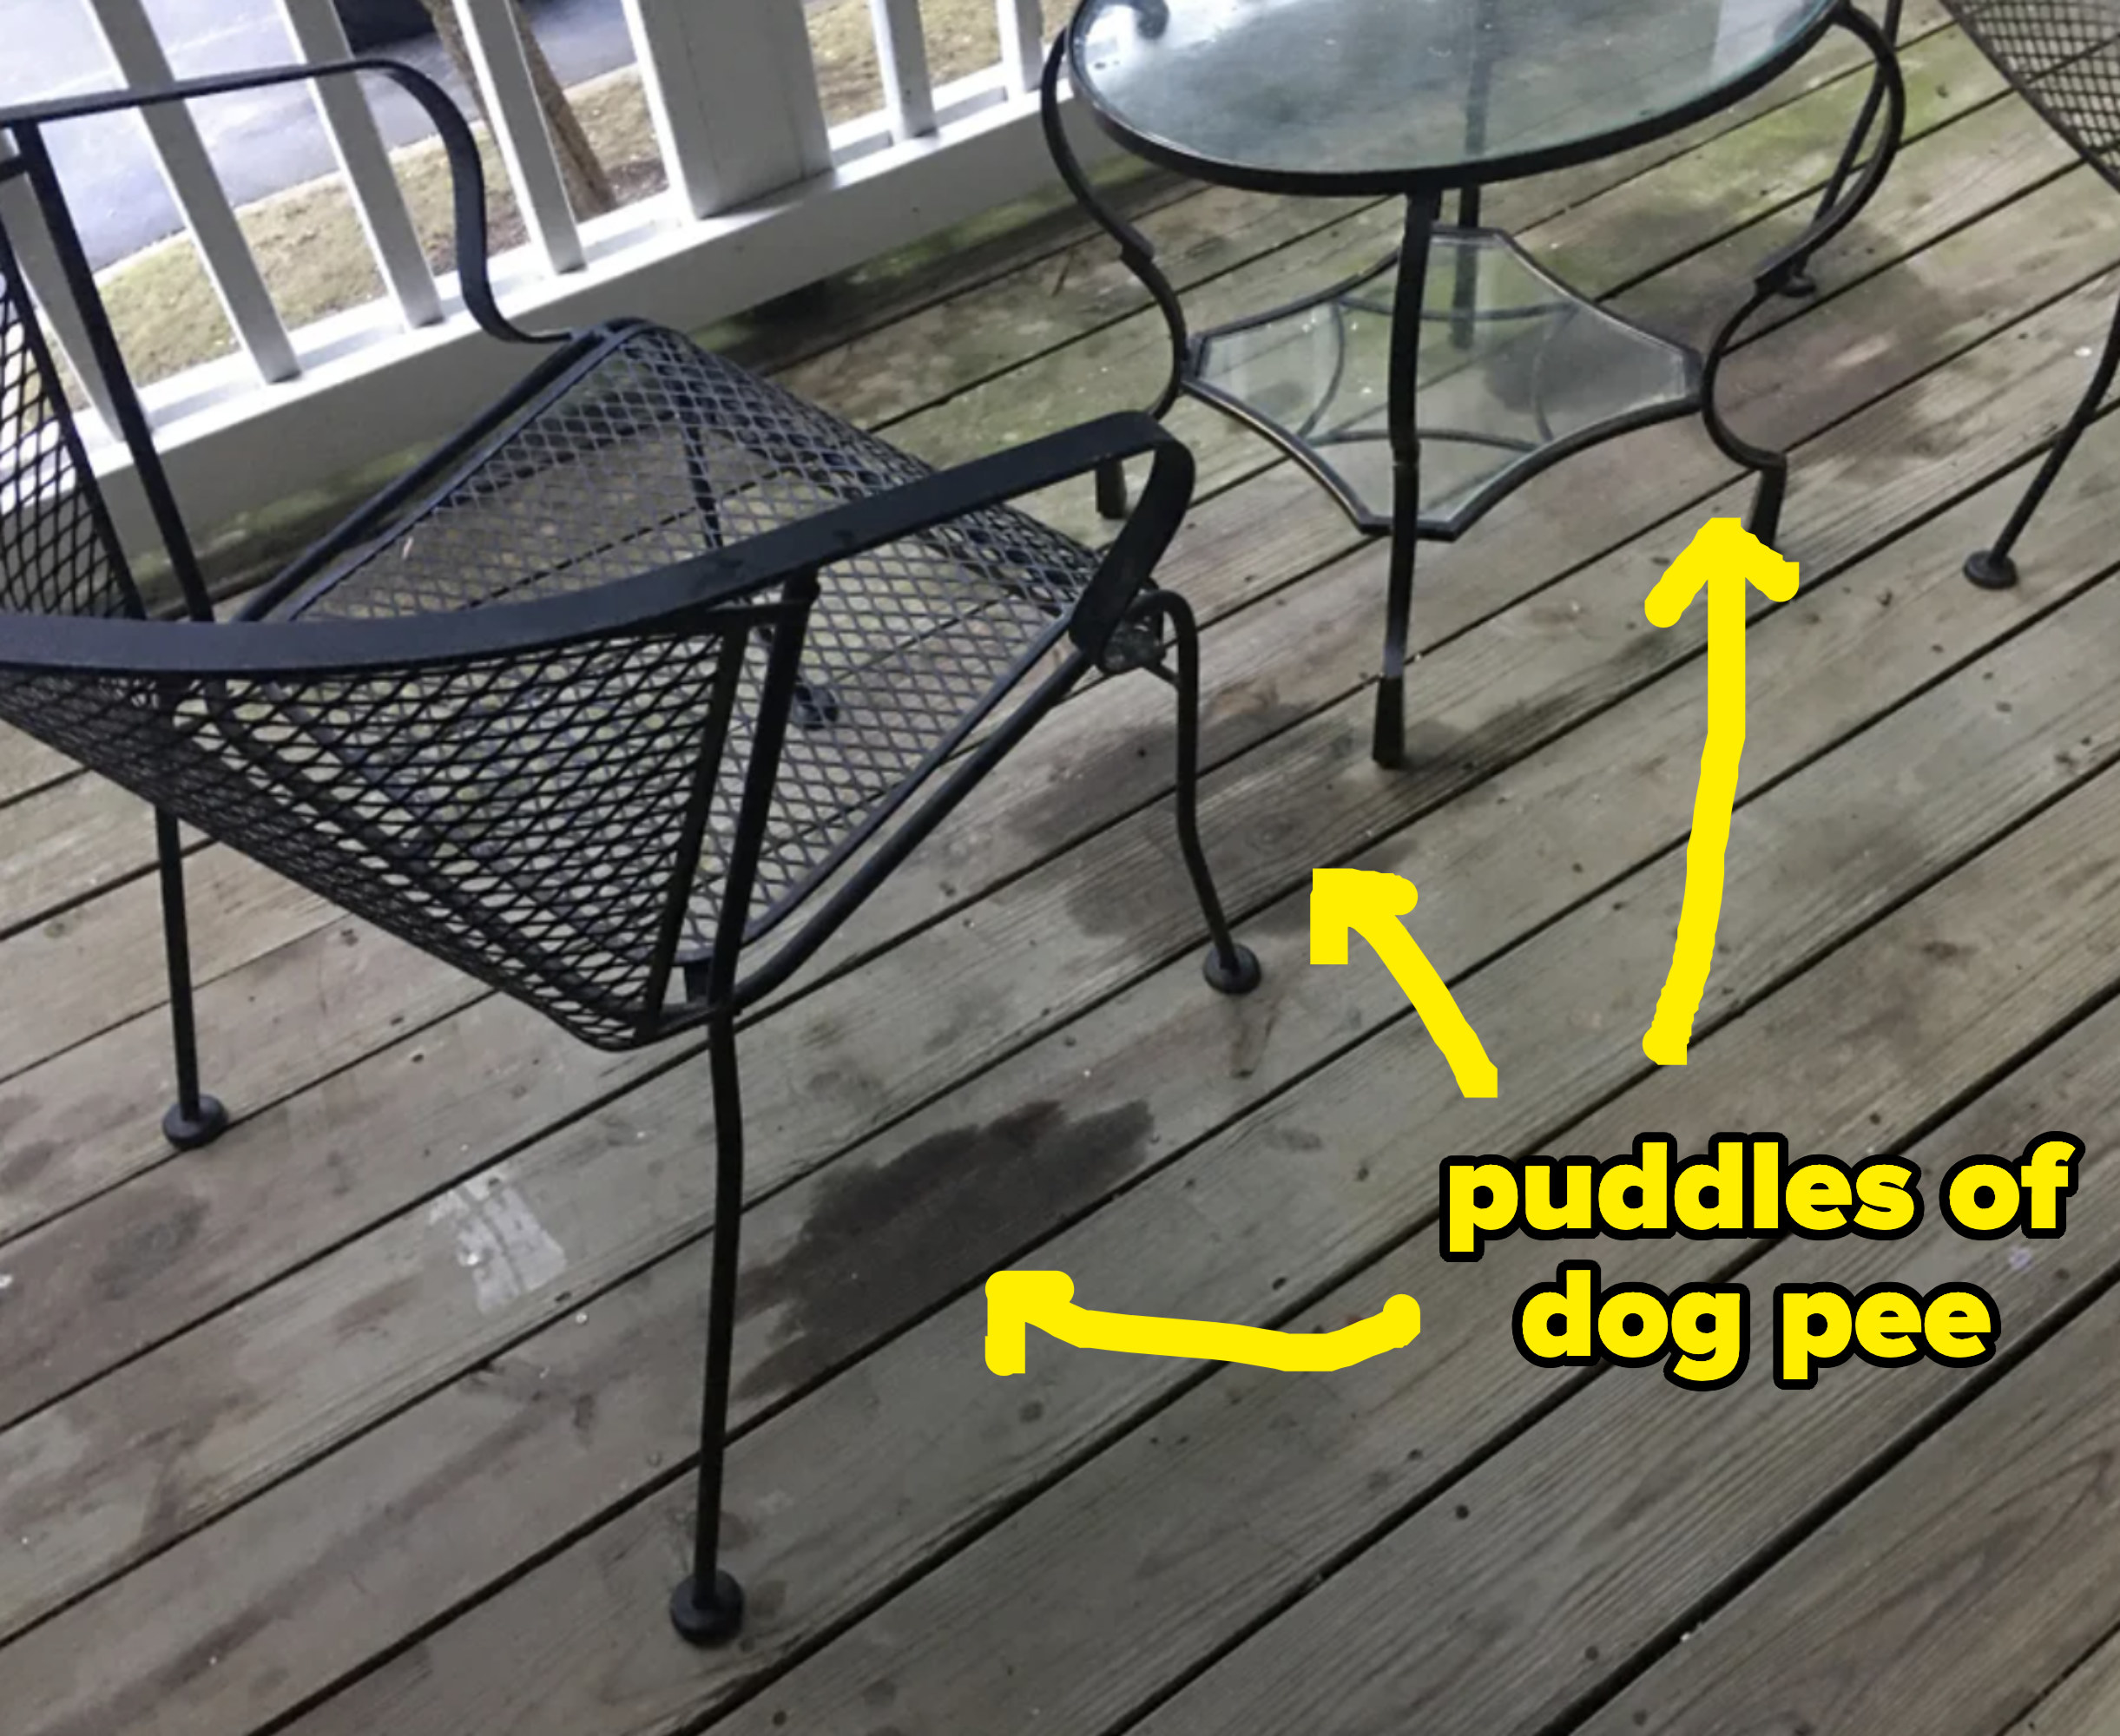 Puddles of dog pee on their deck